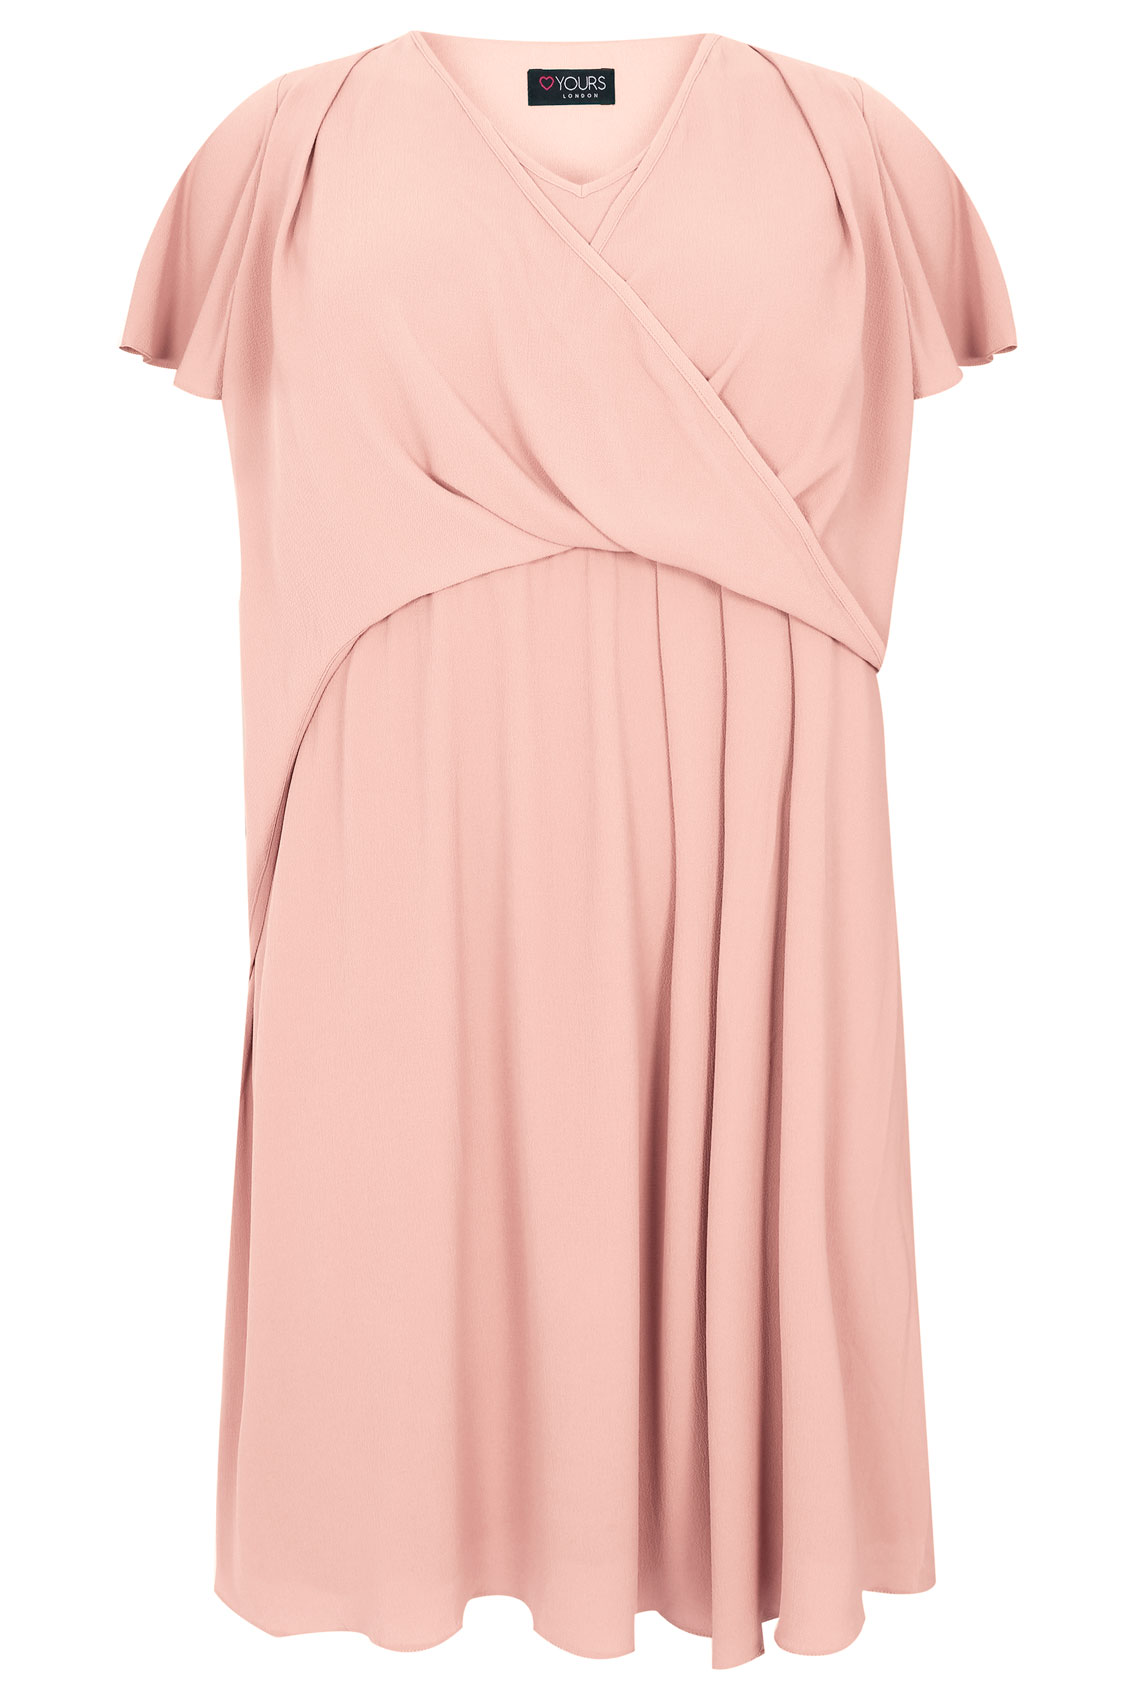 Pale Pink Wrap Front Midi Dress With Angel Sleeves Plus Size 16 to 32